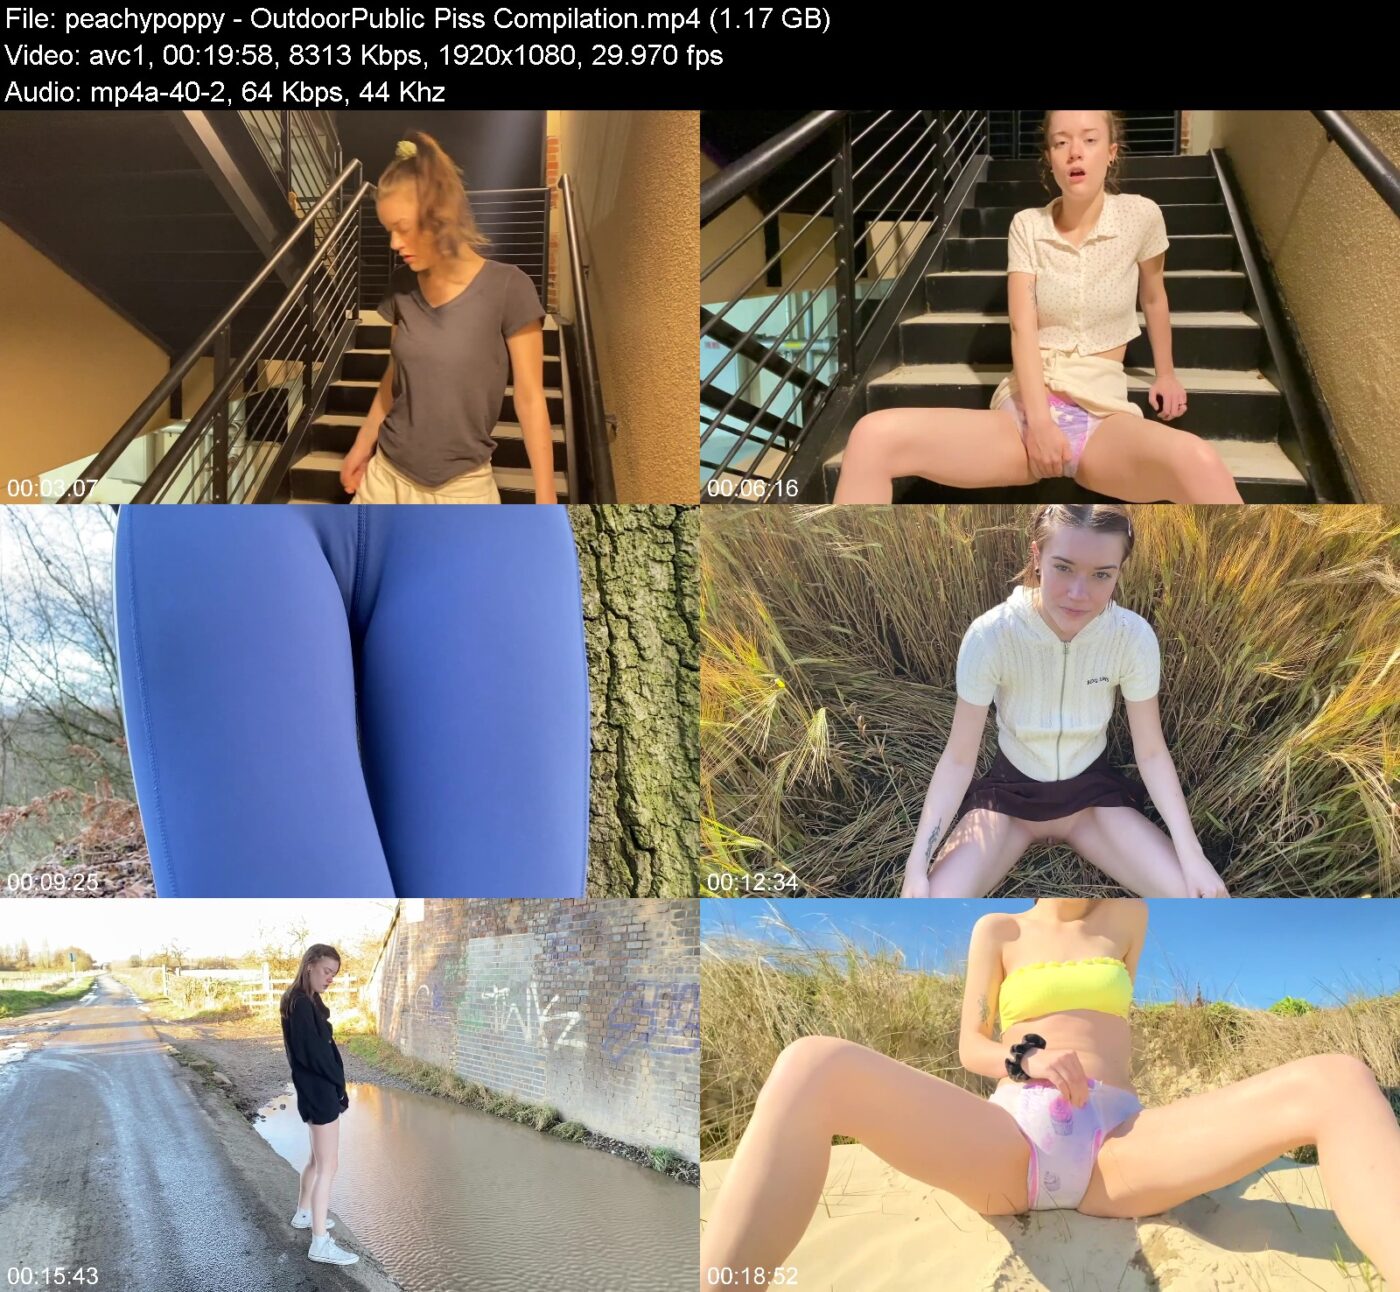 peachypoppy in OutdoorPublic Piss Compilation